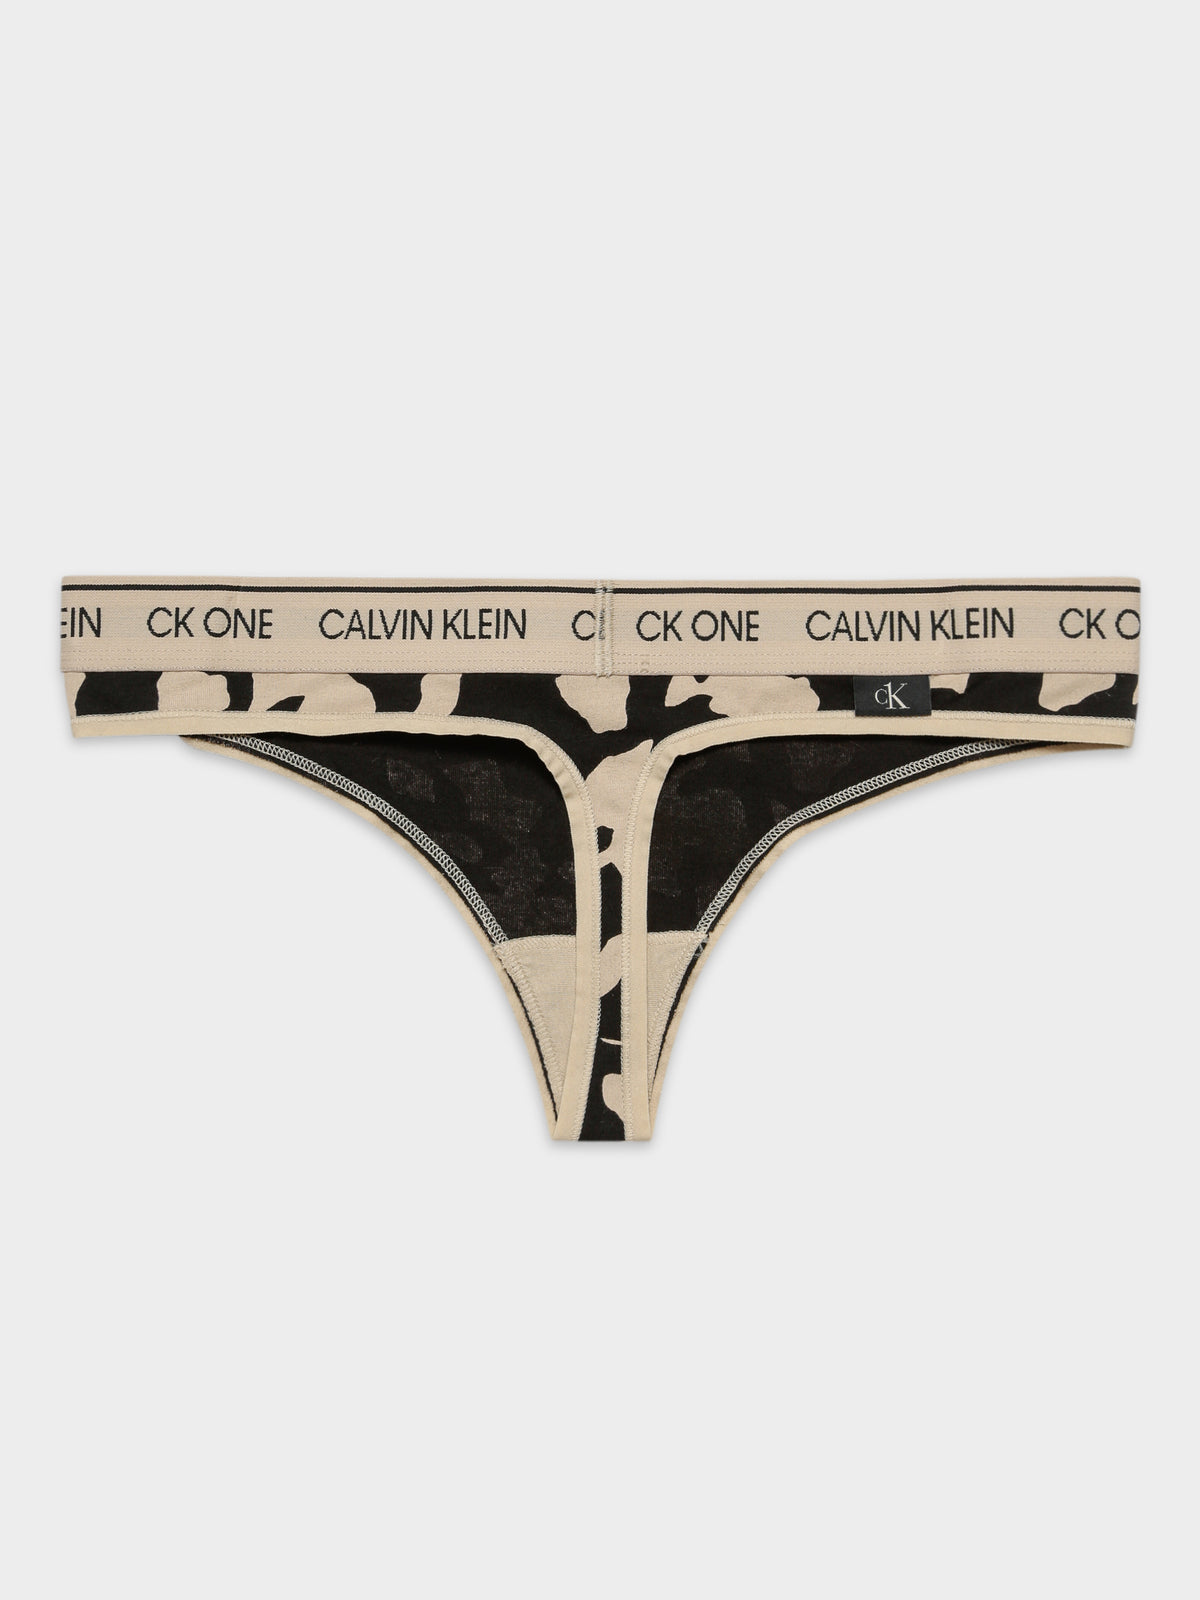 One Cotton Thong in Out Charm